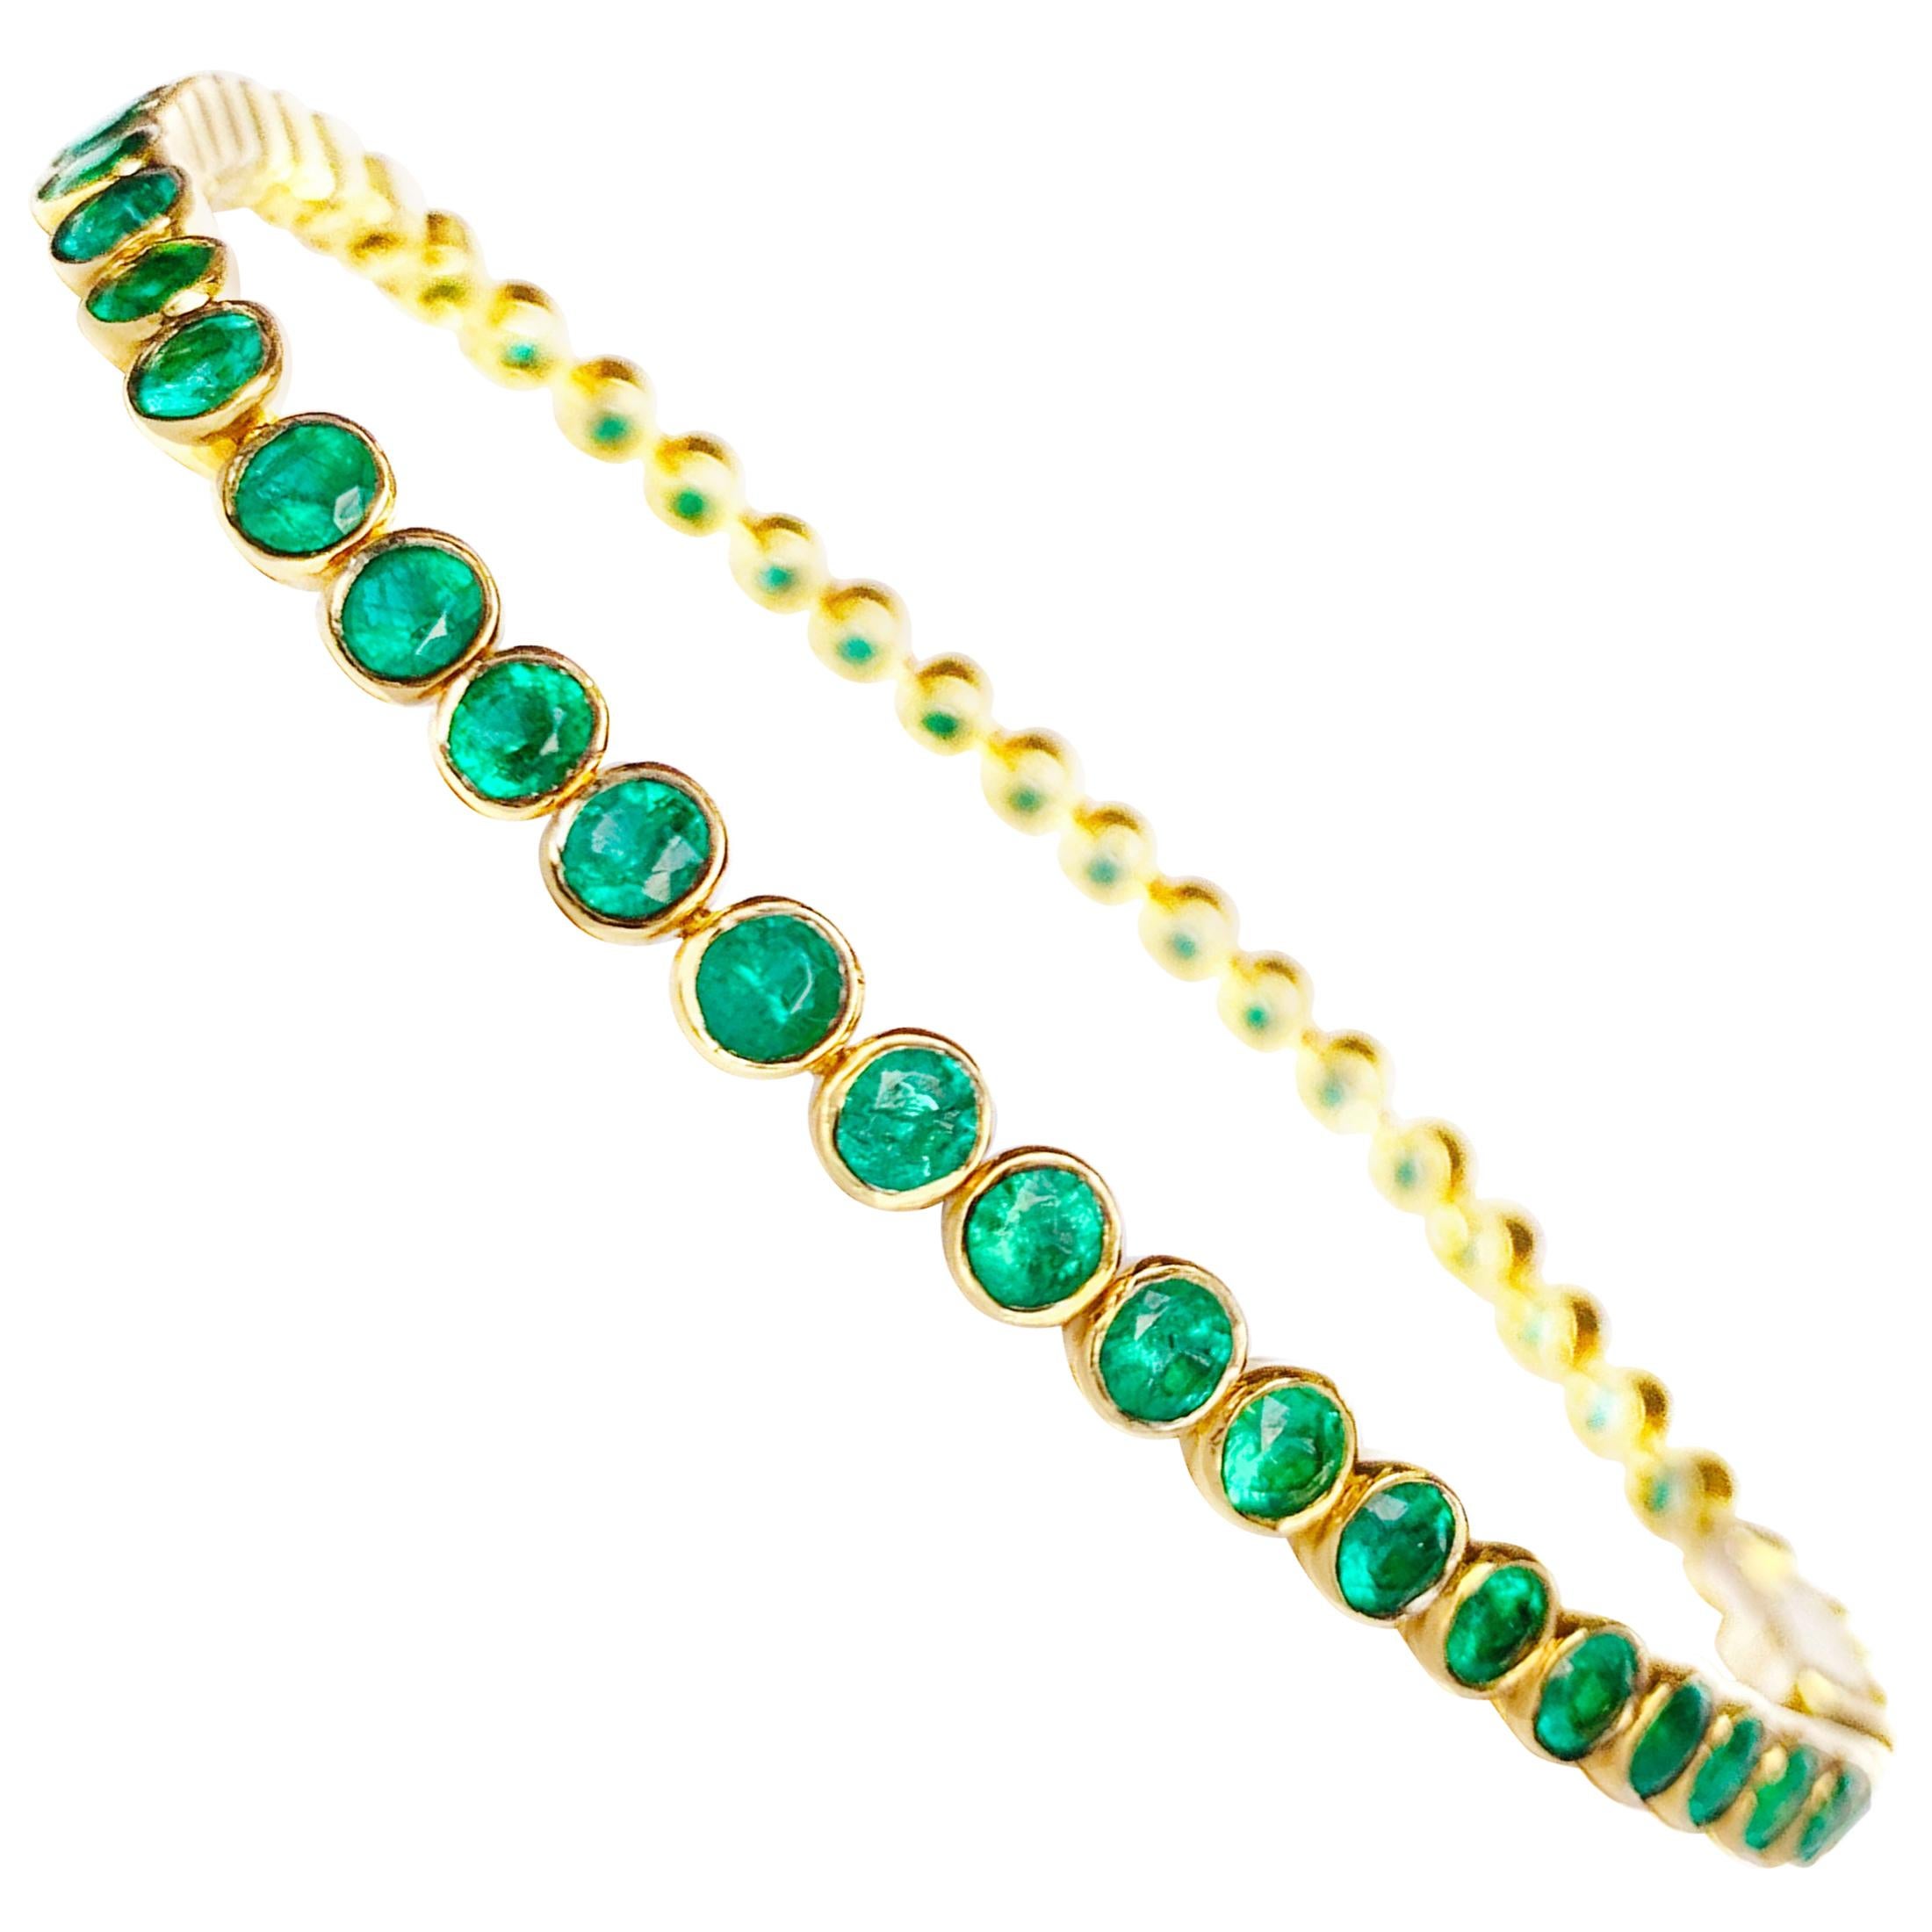 Rosior Classic Yellow Gold "Tennis" Bracelet with Emeralds